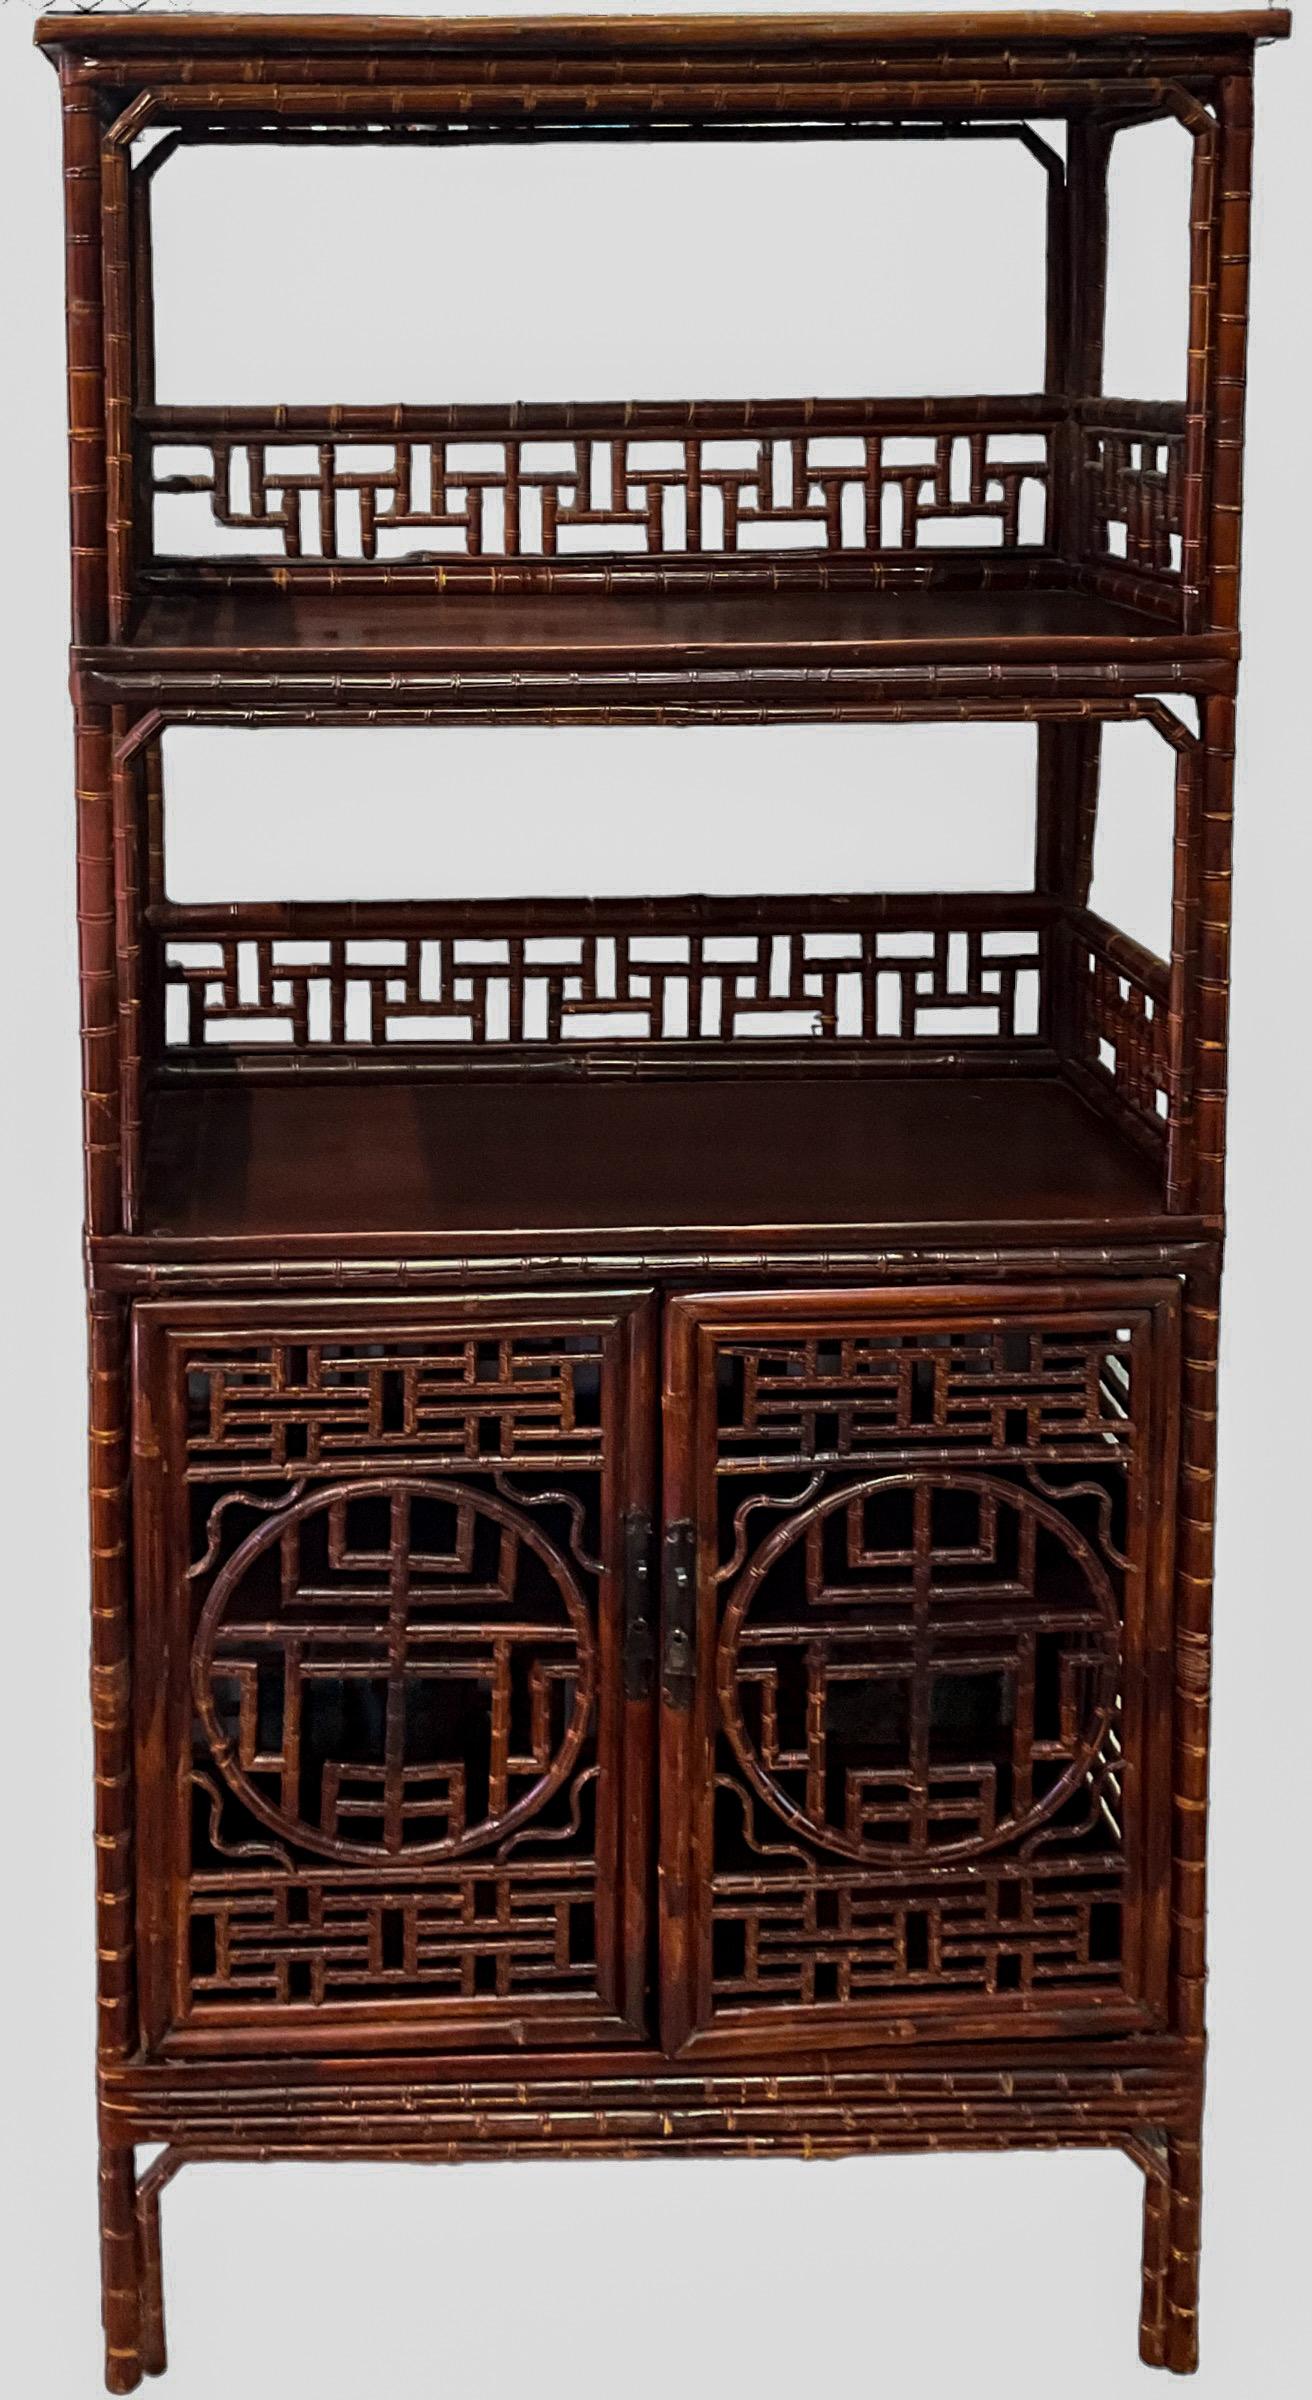 Early 20th-C. Chinese Bamboo Cabinet / Etagere / Bookcase With Ornate Fretwork  For Sale 2